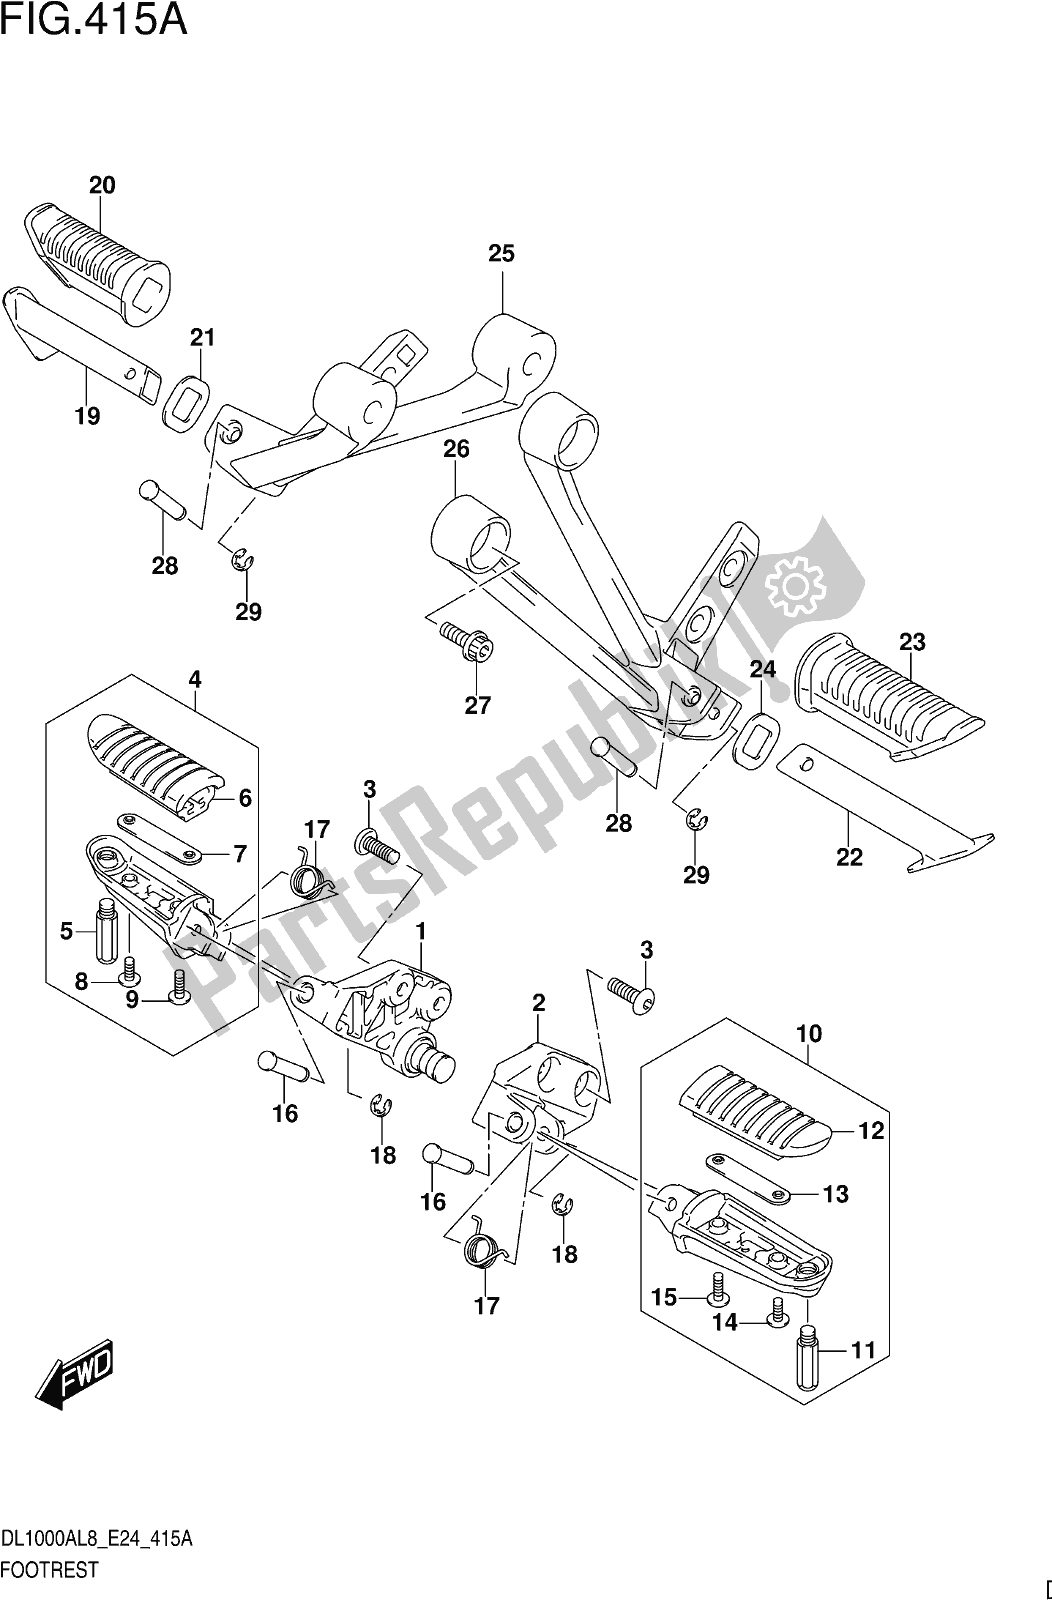 All parts for the Fig. 415a Footrest of the Suzuki DL 1000 XA 2018